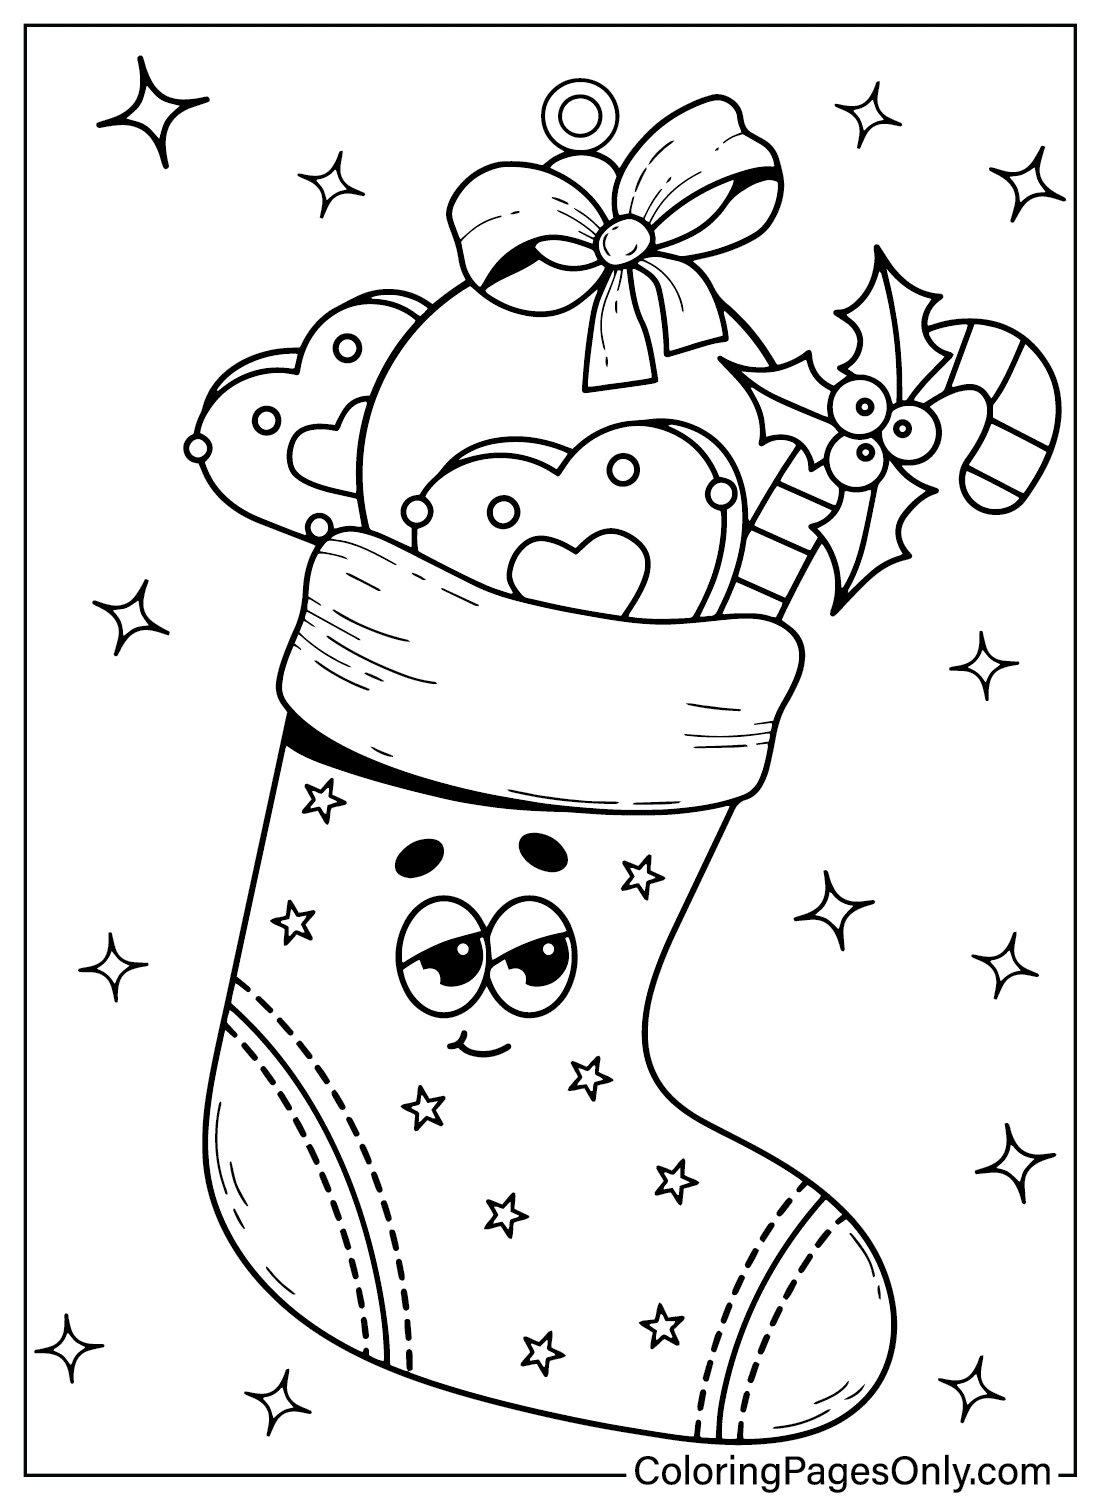 Drawing Christmas Stockings Coloring Page from Christmas Stockings